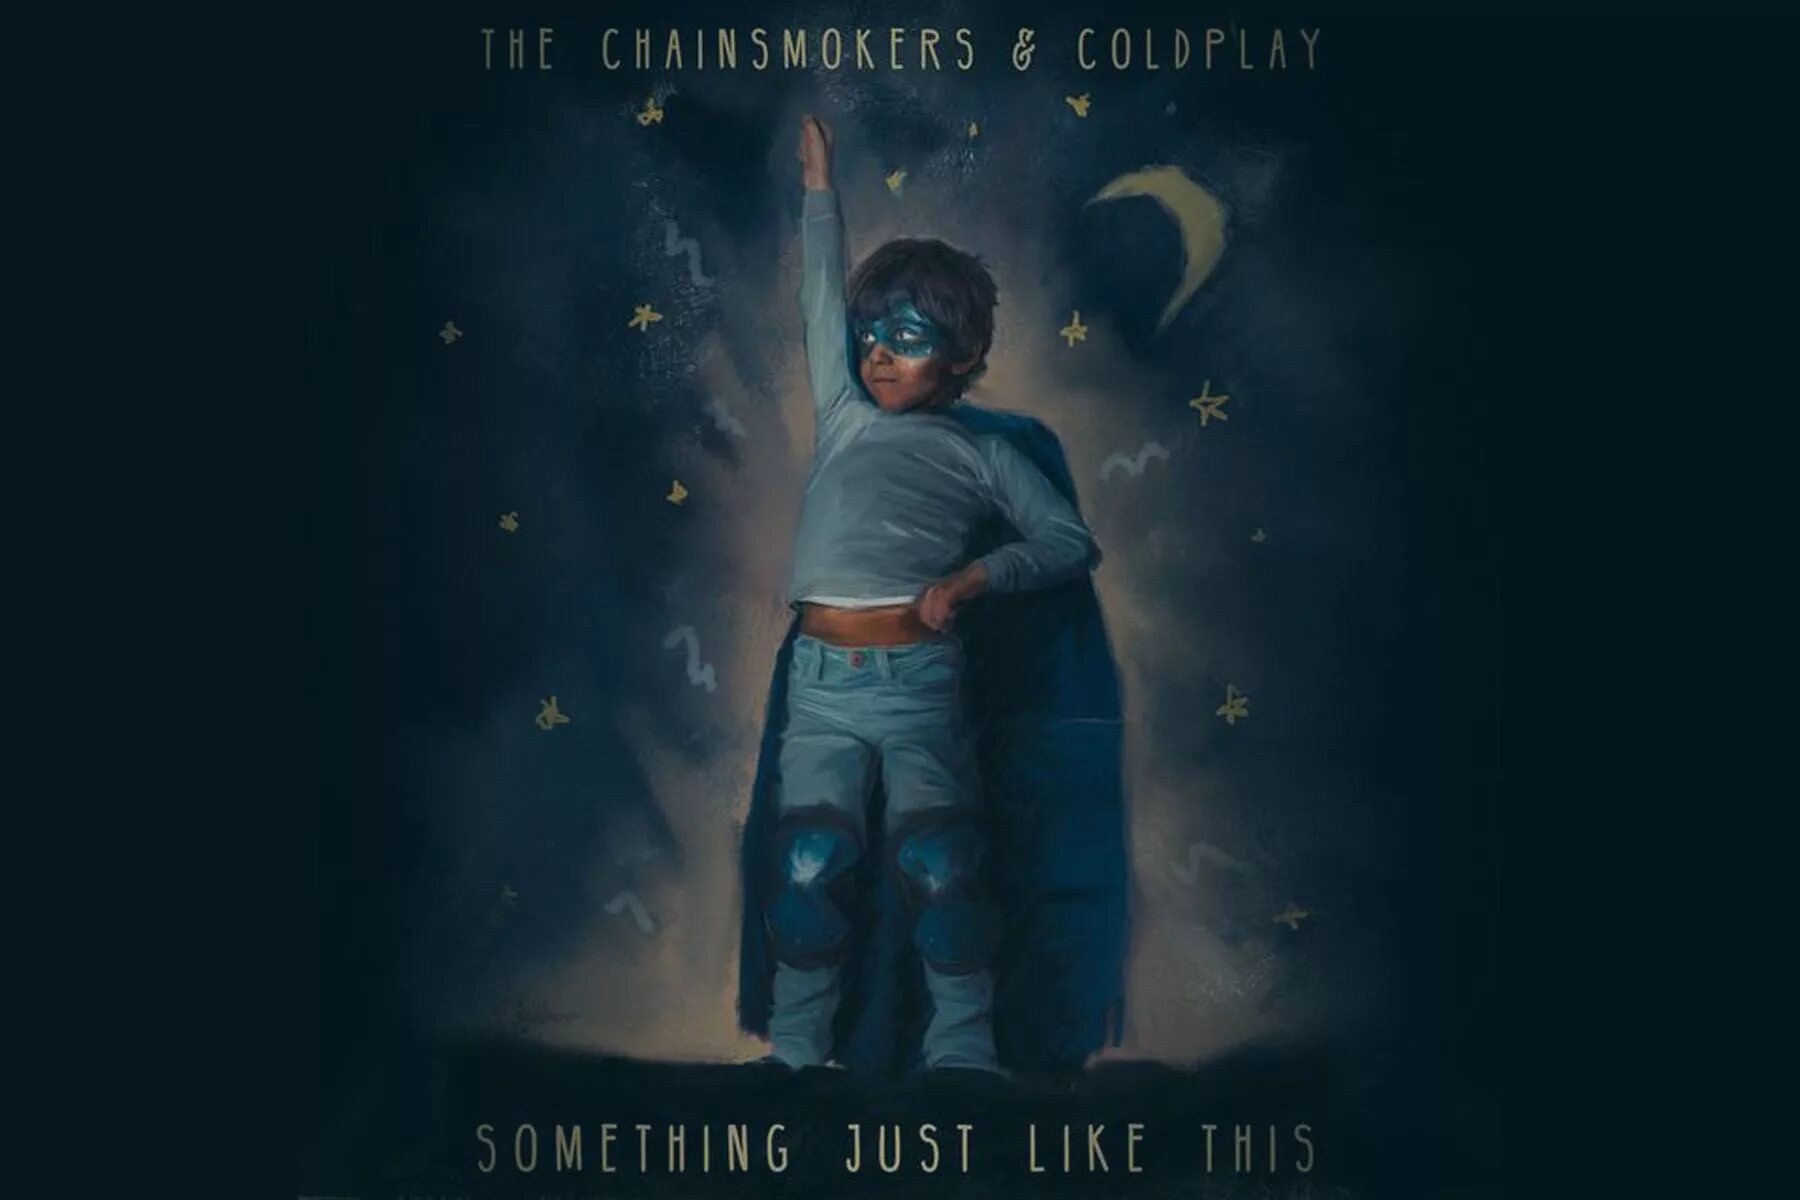 Just got something. Something just like this. Sometimes just like this. Something just like this слова. The Chainsmokers just like this.